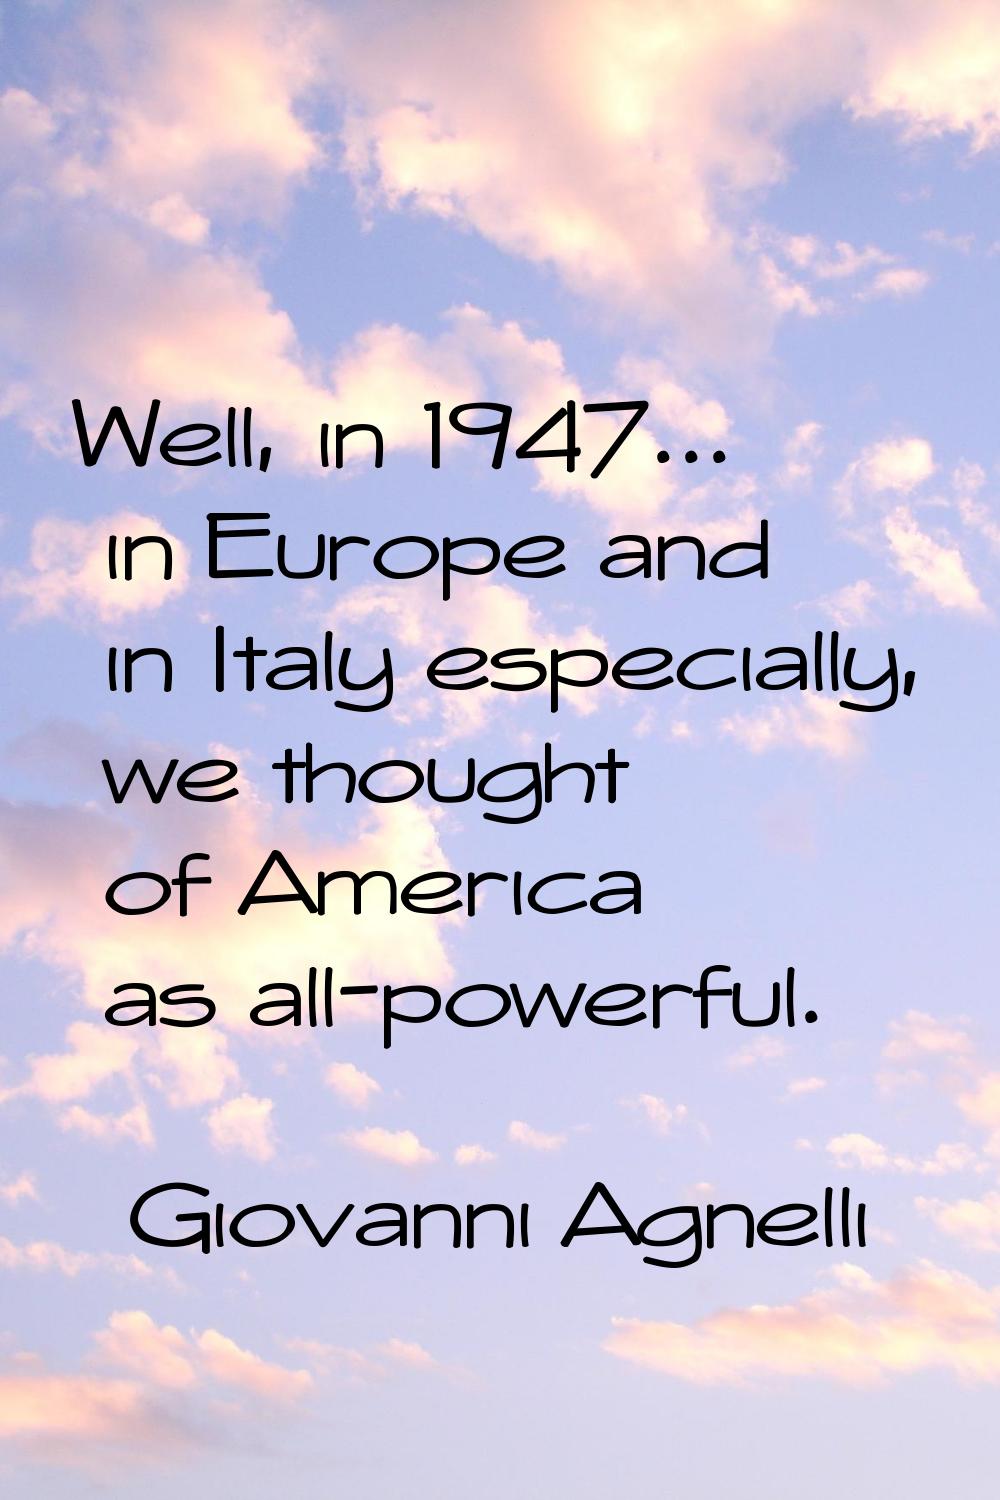 Well, in 1947... in Europe and in Italy especially, we thought of America as all-powerful.